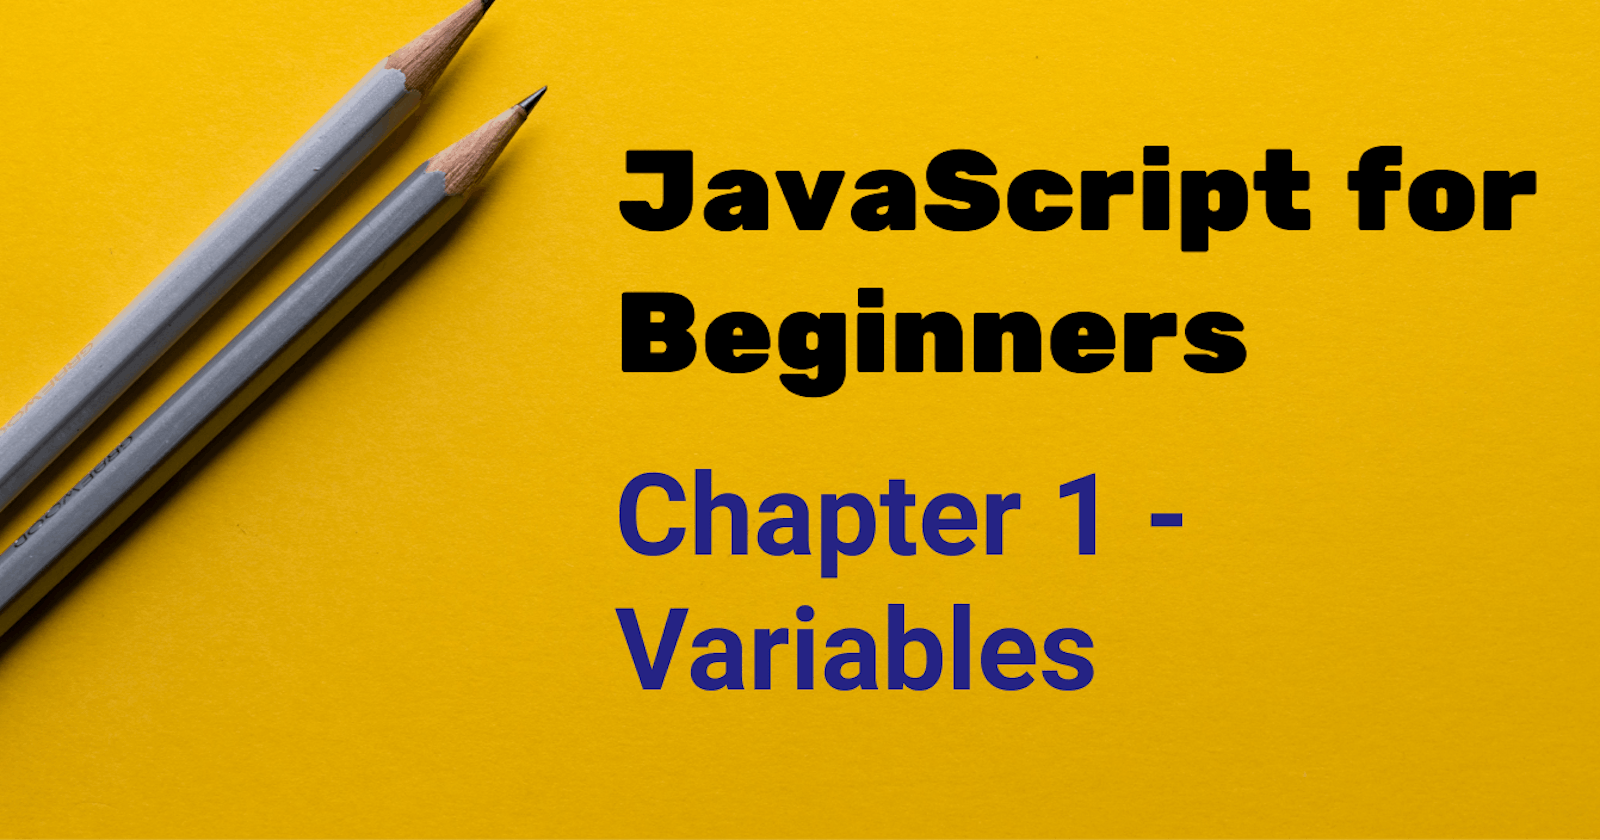 Chapter 1 - Variables